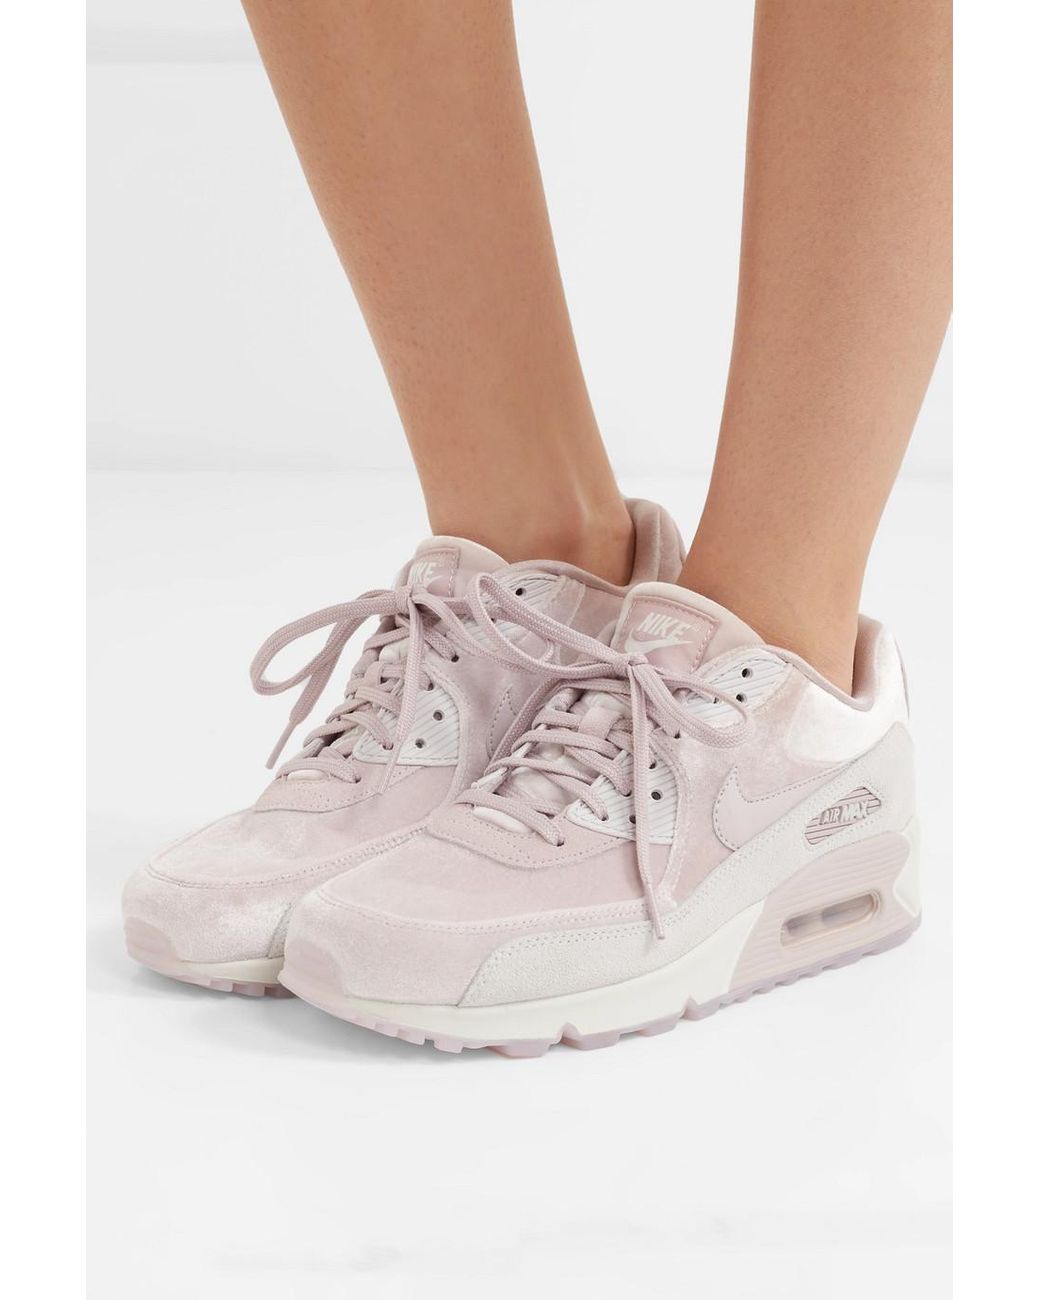 Nike Air Max 90 Lx Velvet And Suede Sneakers in Pink | Lyst